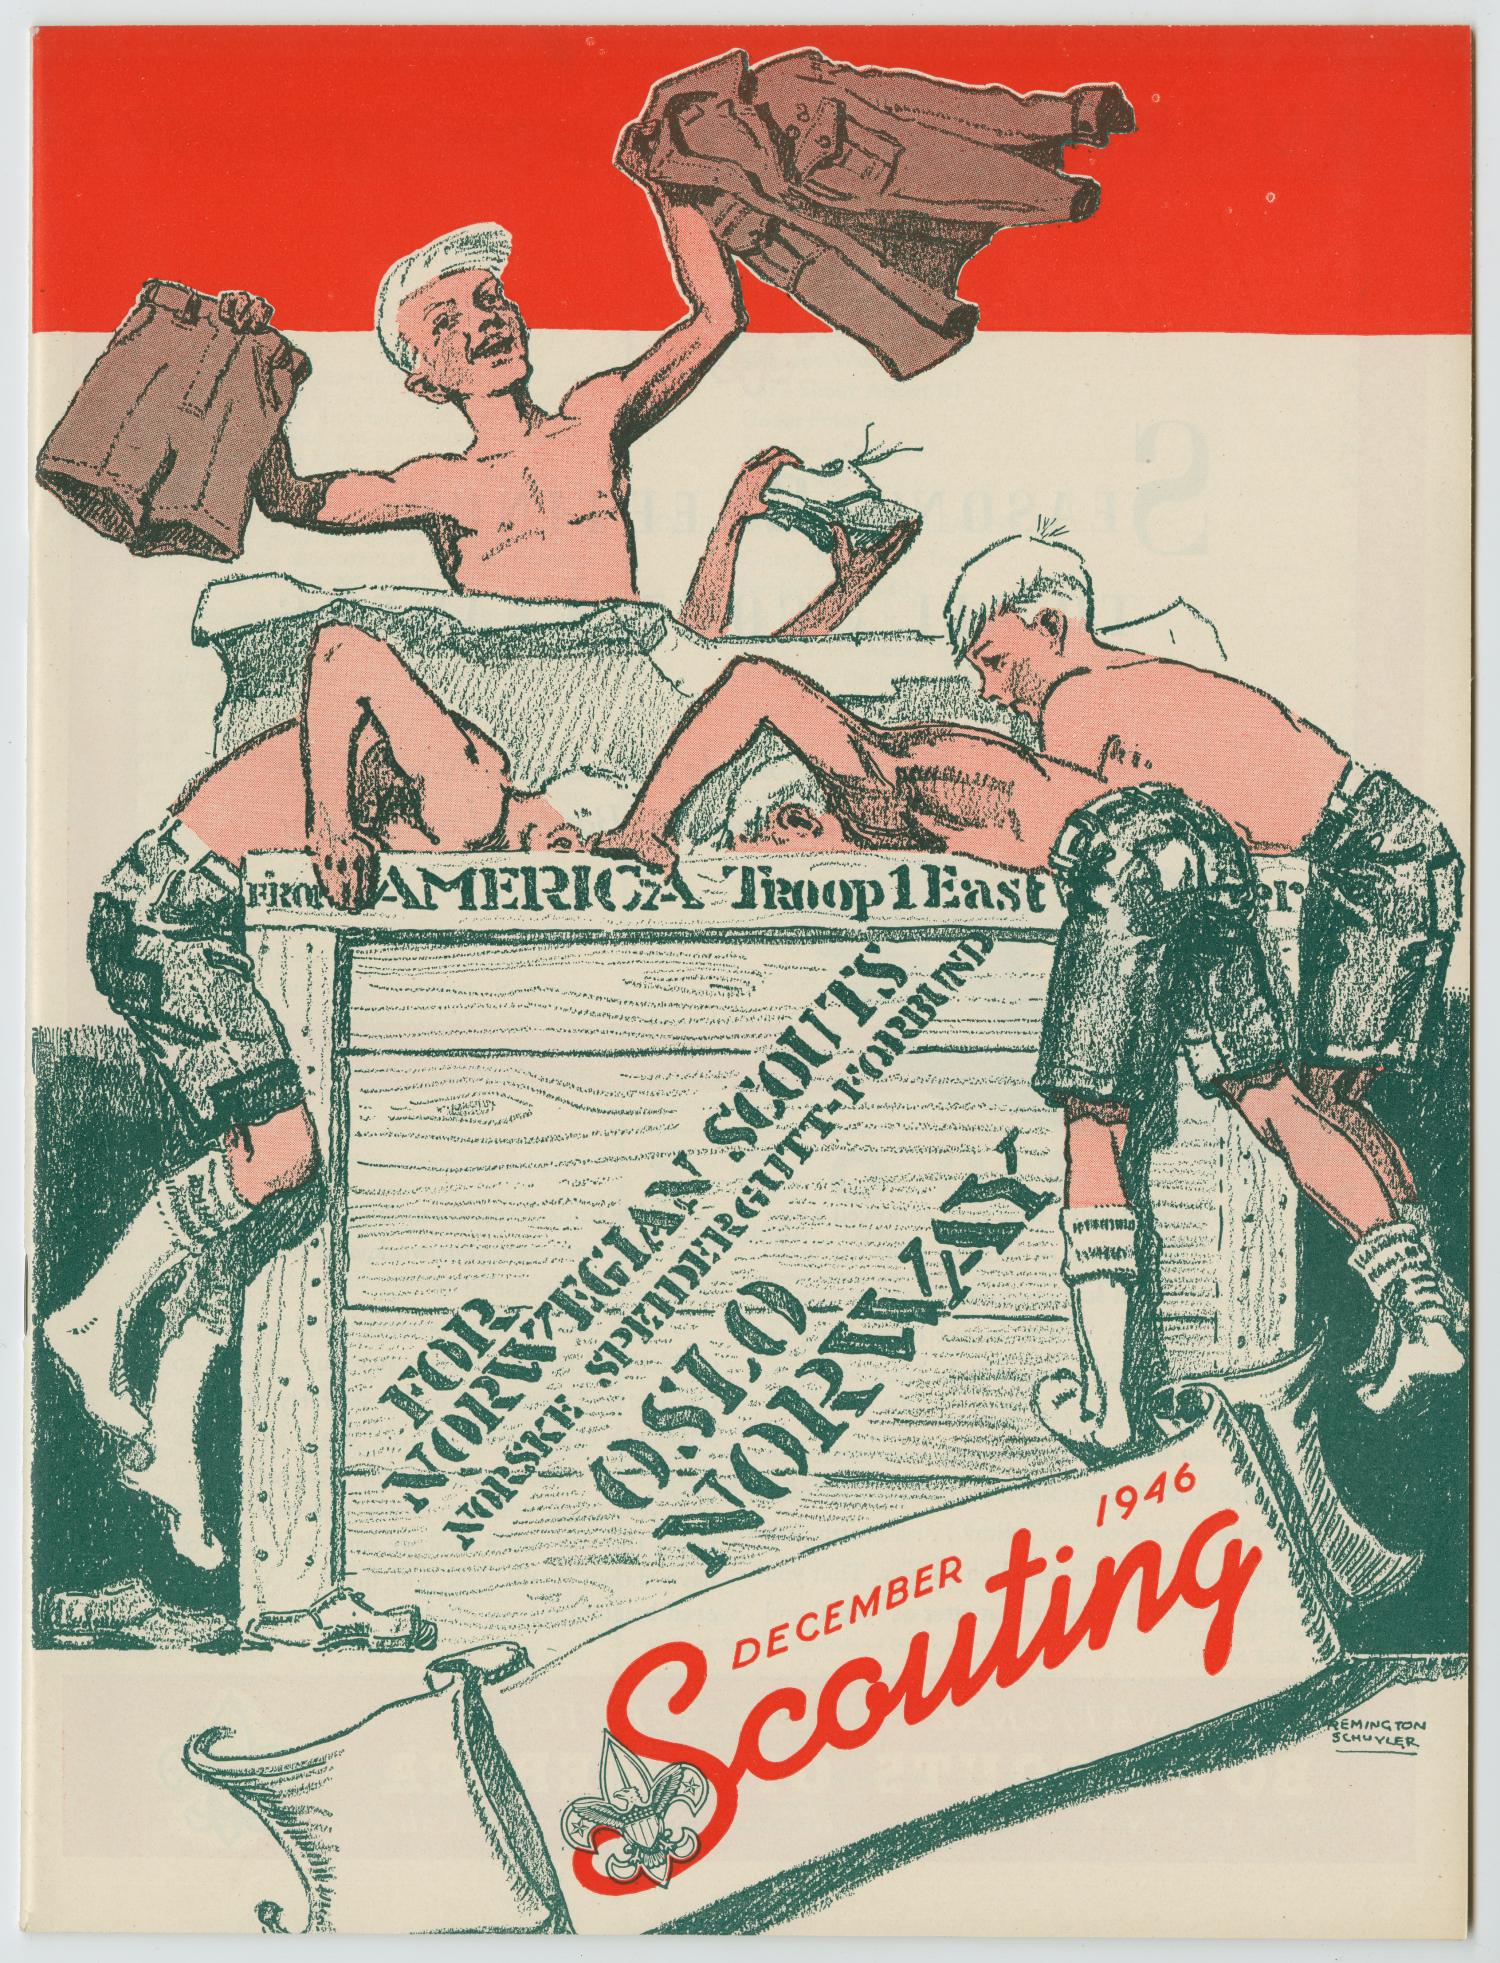 Scouting, Volume 34, Number 10, December 1946
                                                
                                                    Front Cover
                                                